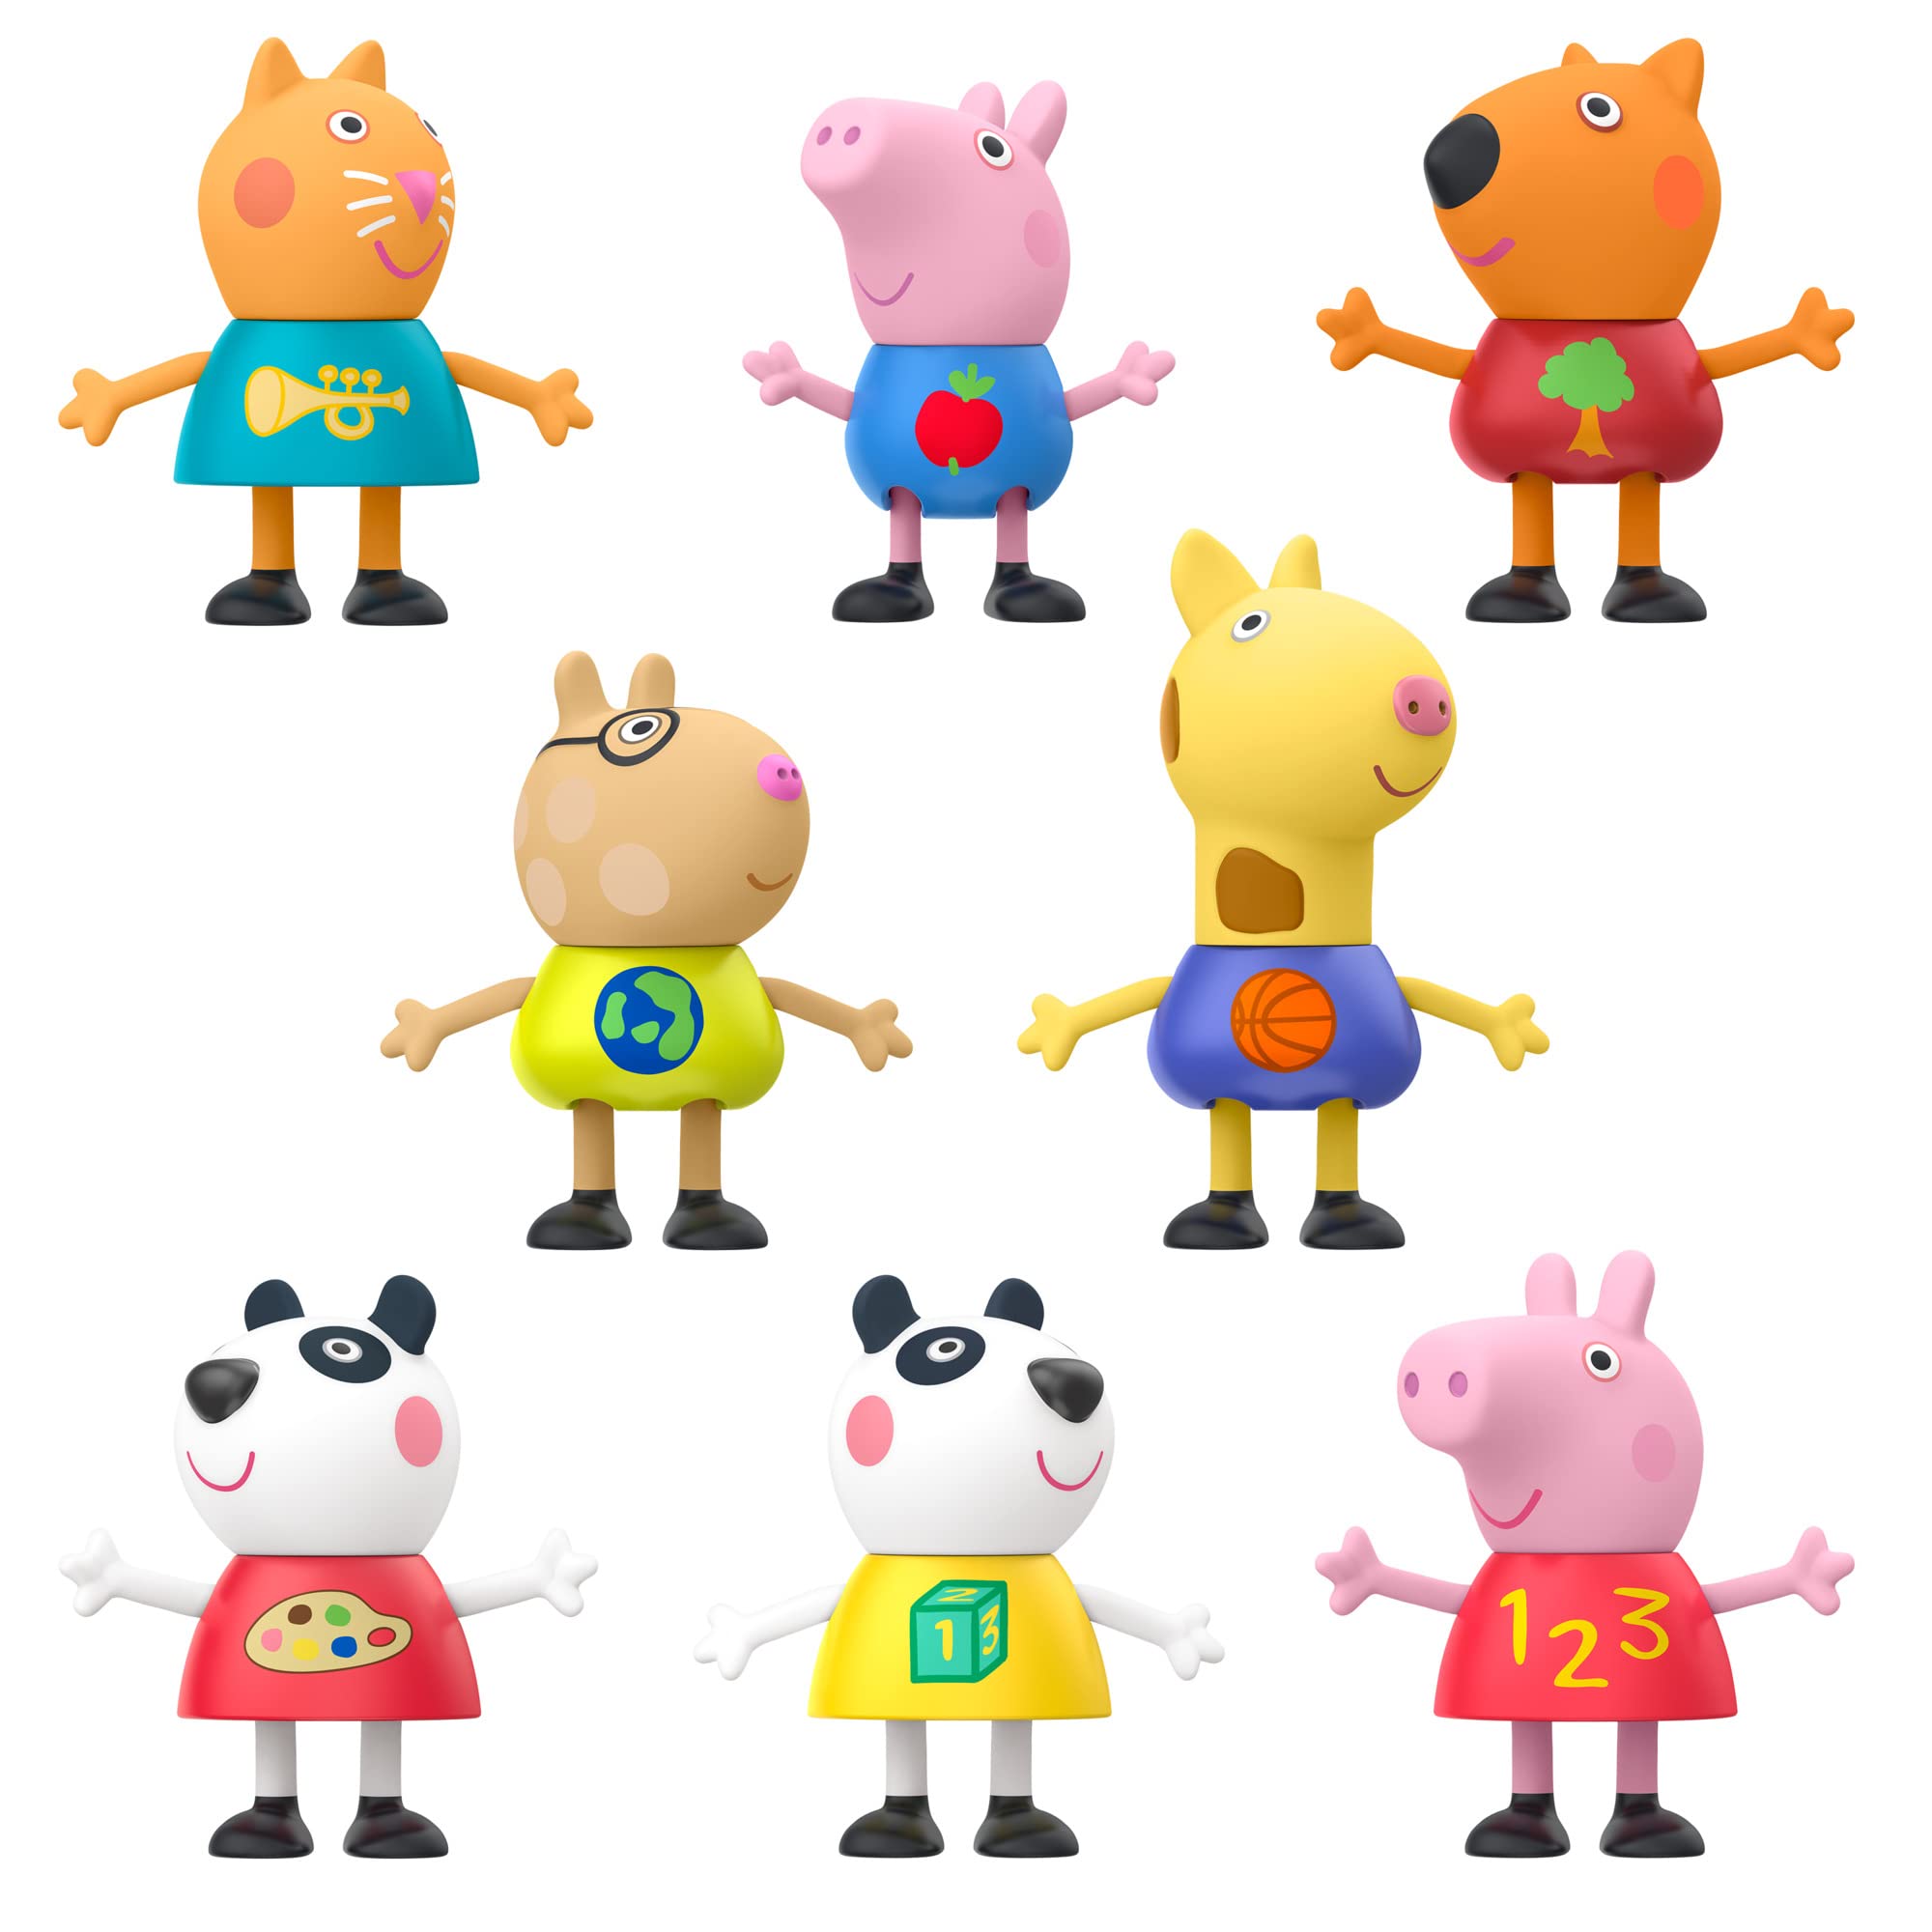 Peppa Pig Figure 8-Pack Toy Includes Peppa Pig, George Pig, Peggi Panda, Candy Cat and more, Amazon Exclusive, for Ages 3 and up